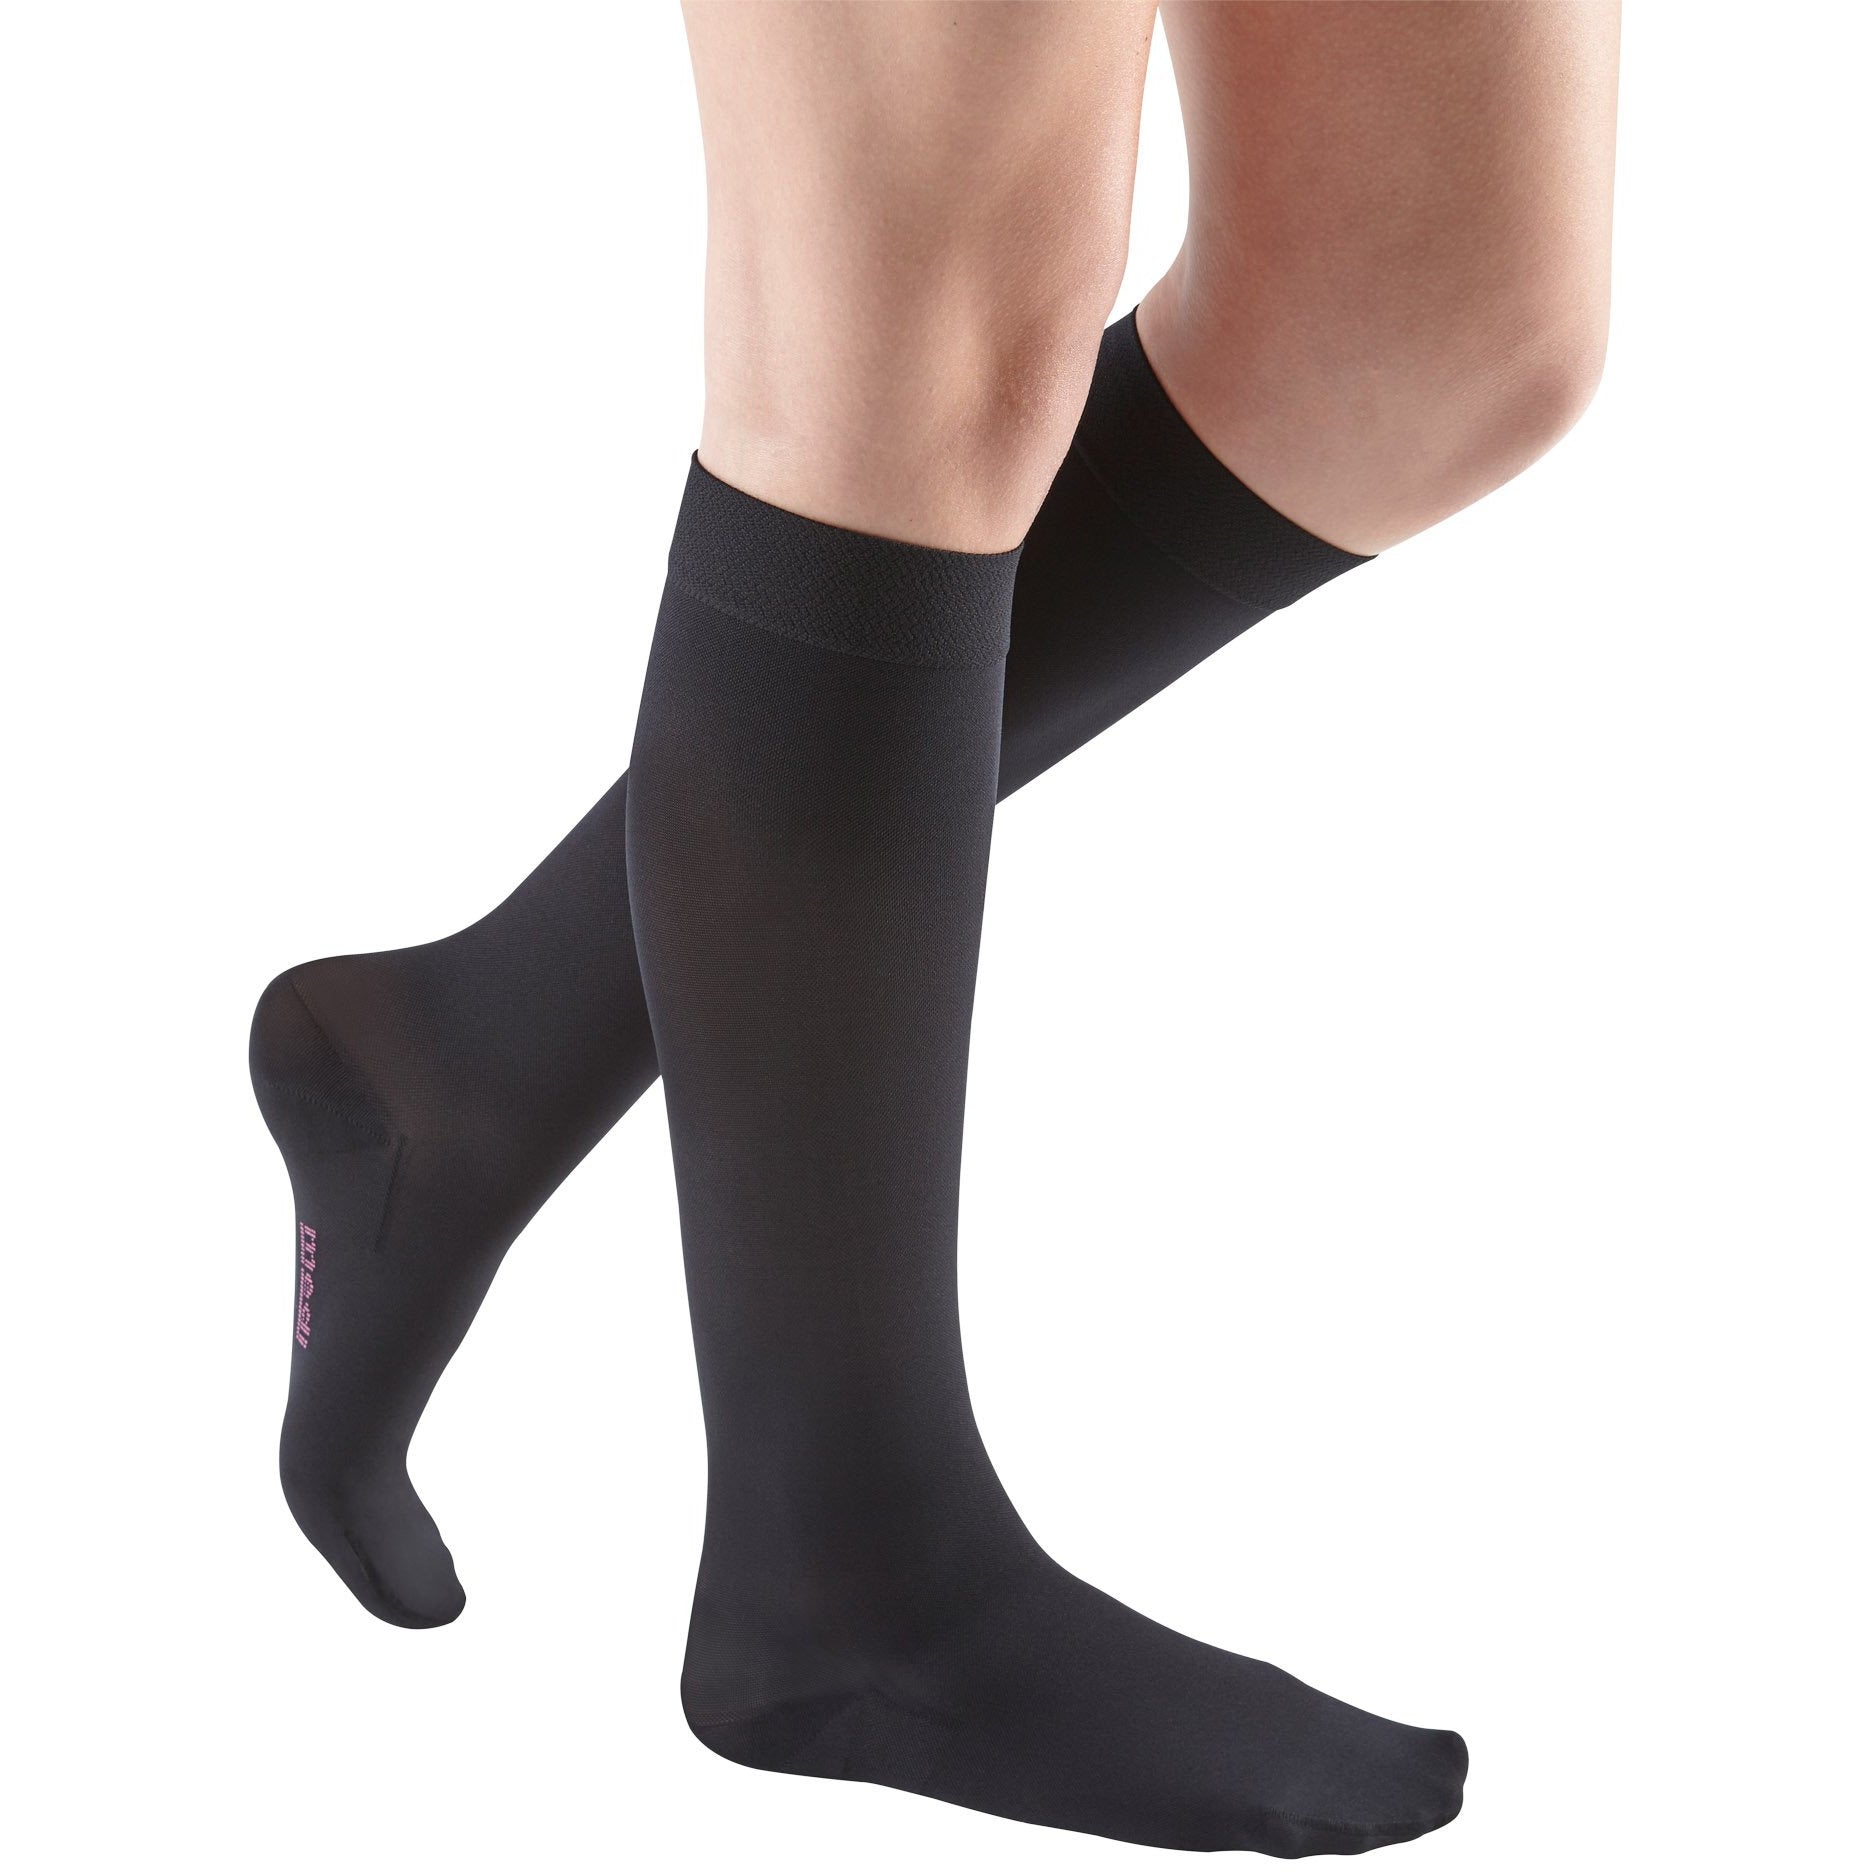 WHOTAY Plus Size Compression Socks Wide Calf for Women 20-30mmhg